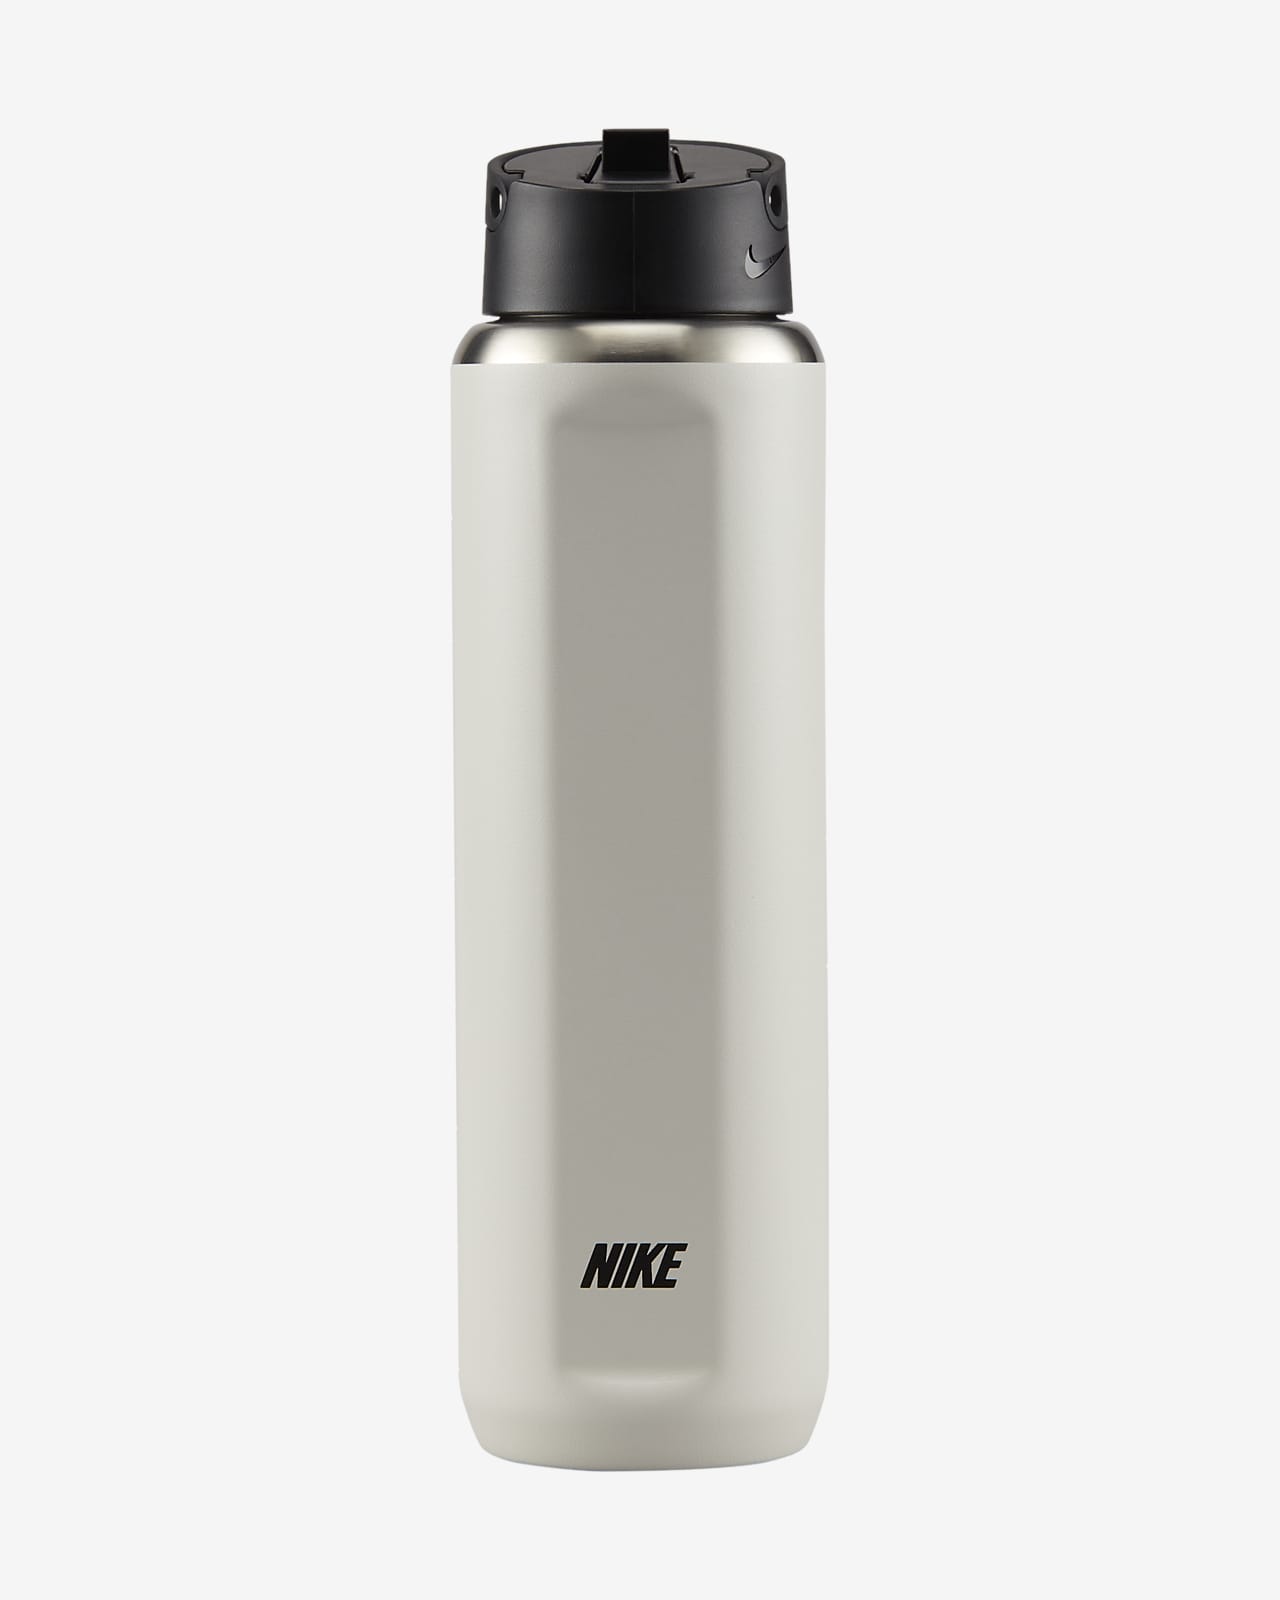 https://static.nike.com/a/images/t_PDP_1280_v1/f_auto,q_auto:eco/d56b5ee3-bfac-49b2-b63e-fd9fd2b8d092/recharge-stainless-steel-straw-bottle-f2jHrs.png